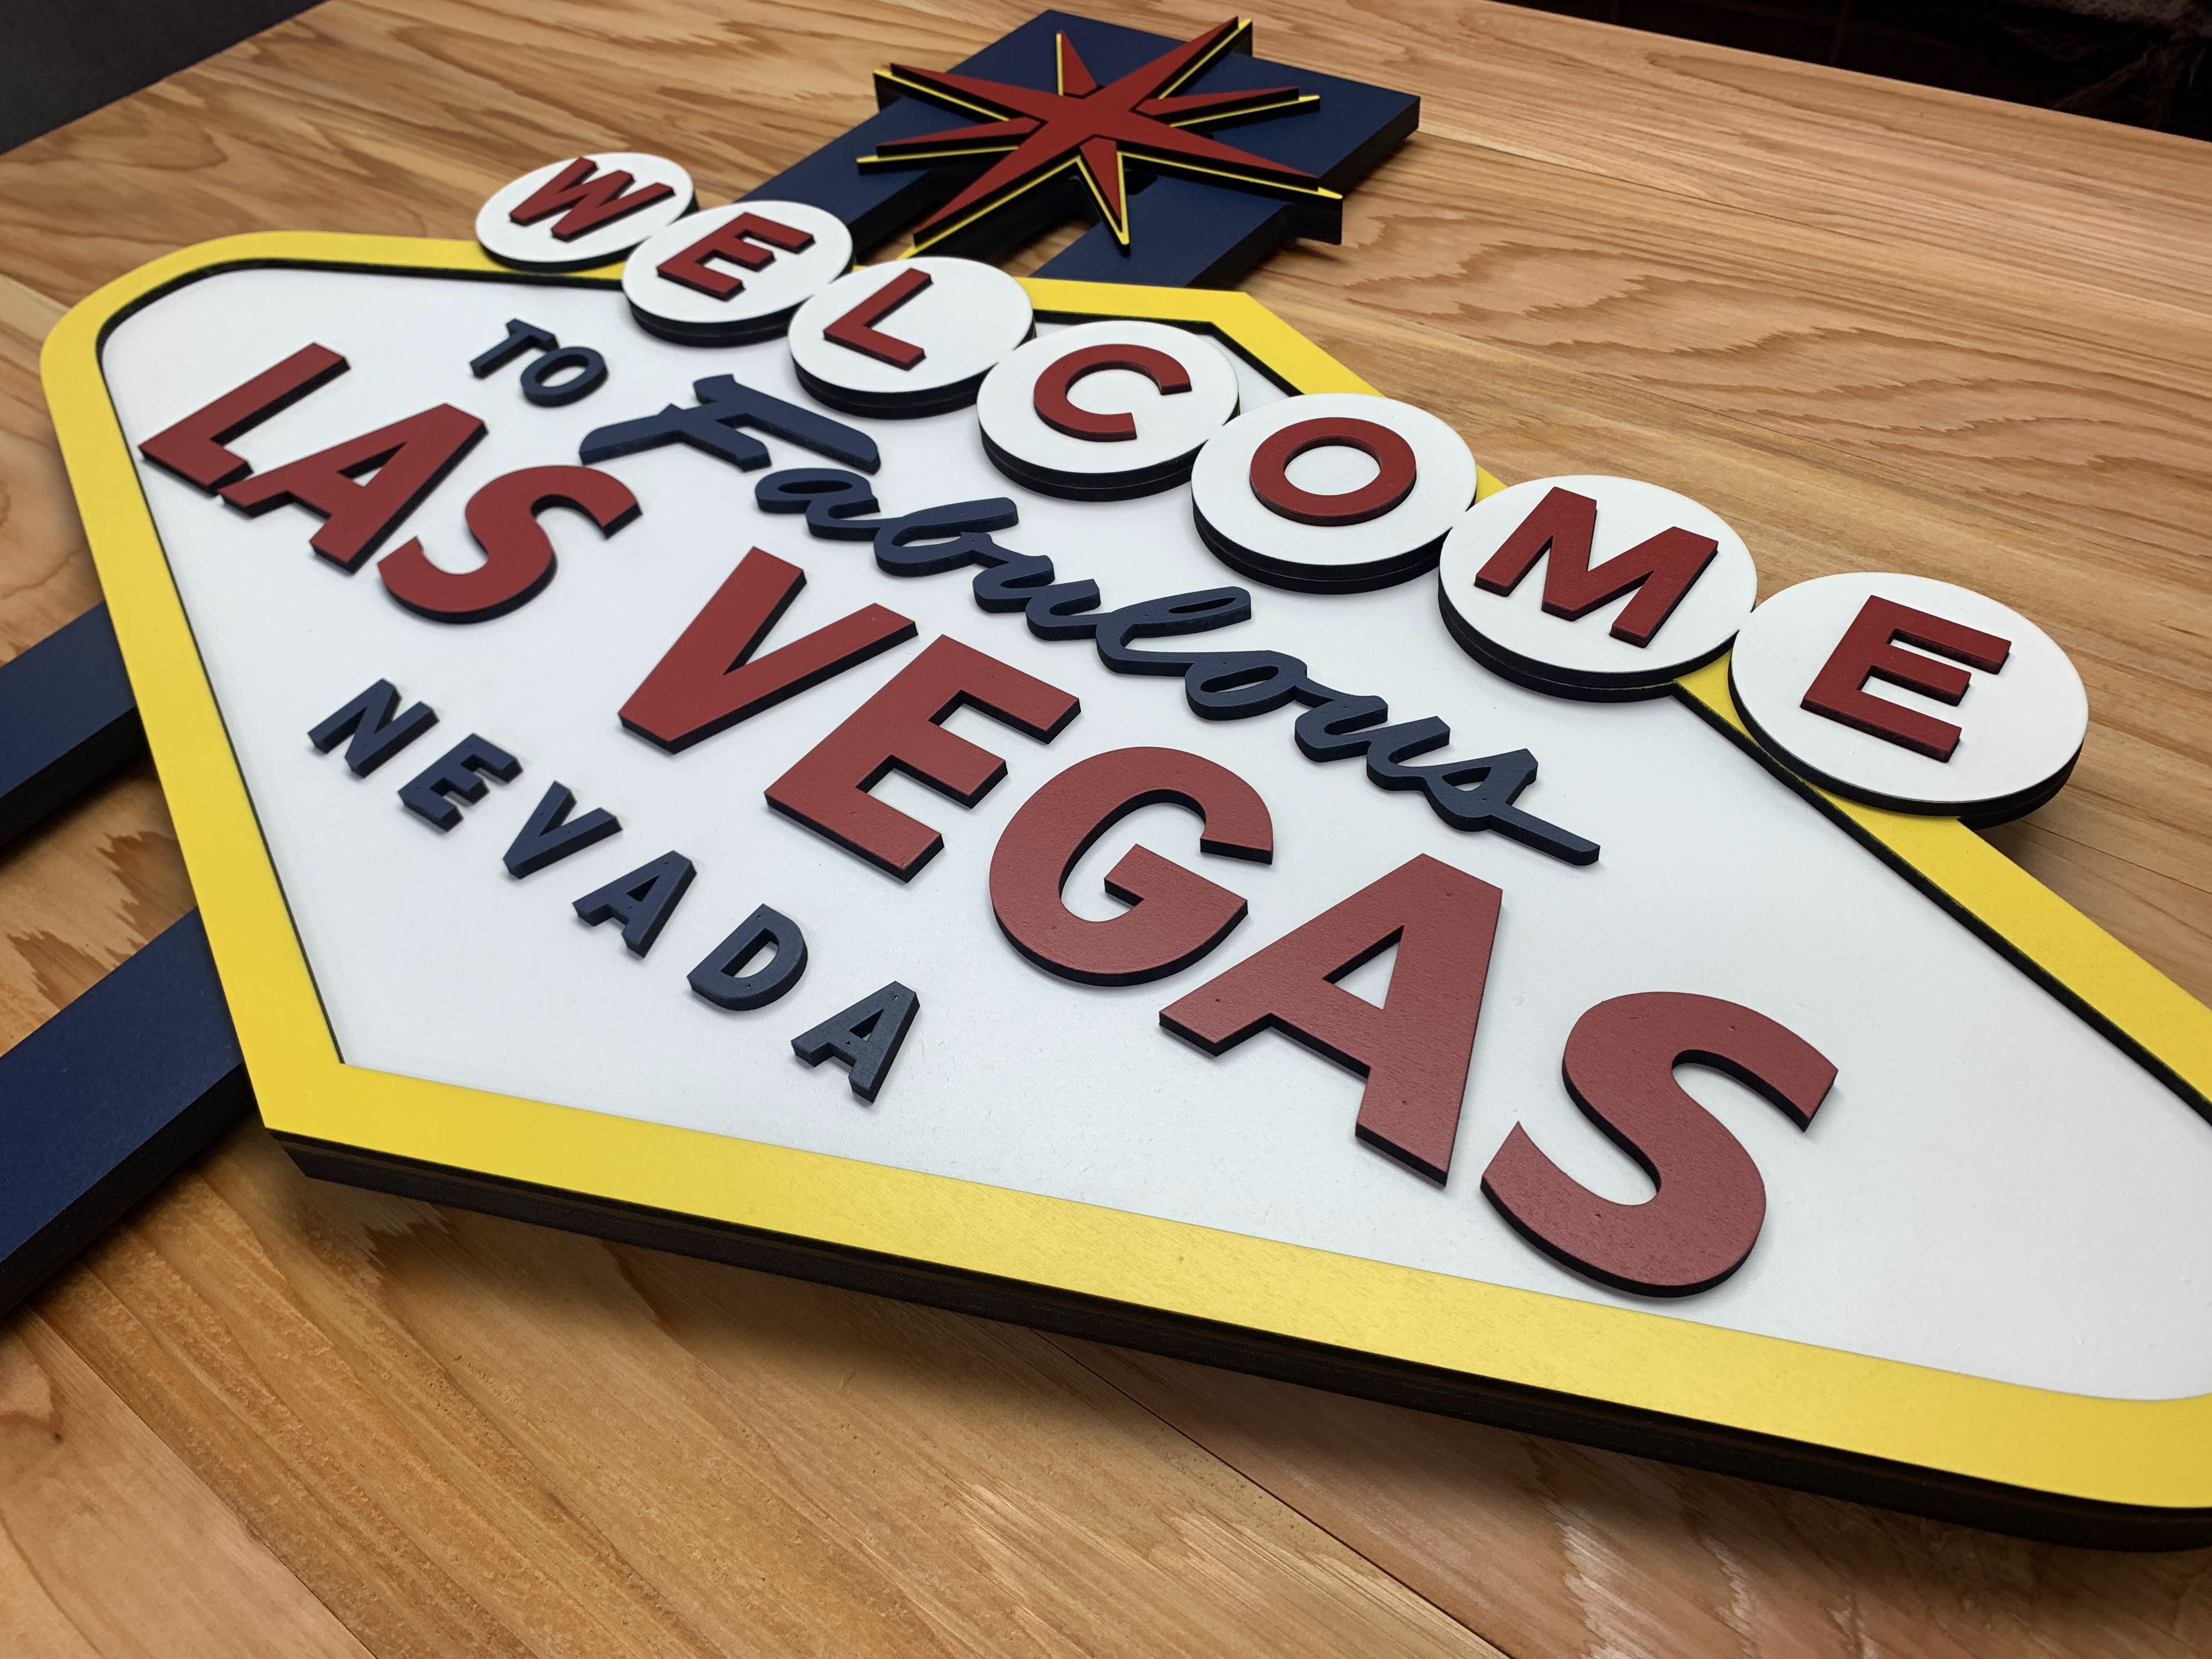 Welcome To Las Vegas Wood Sign